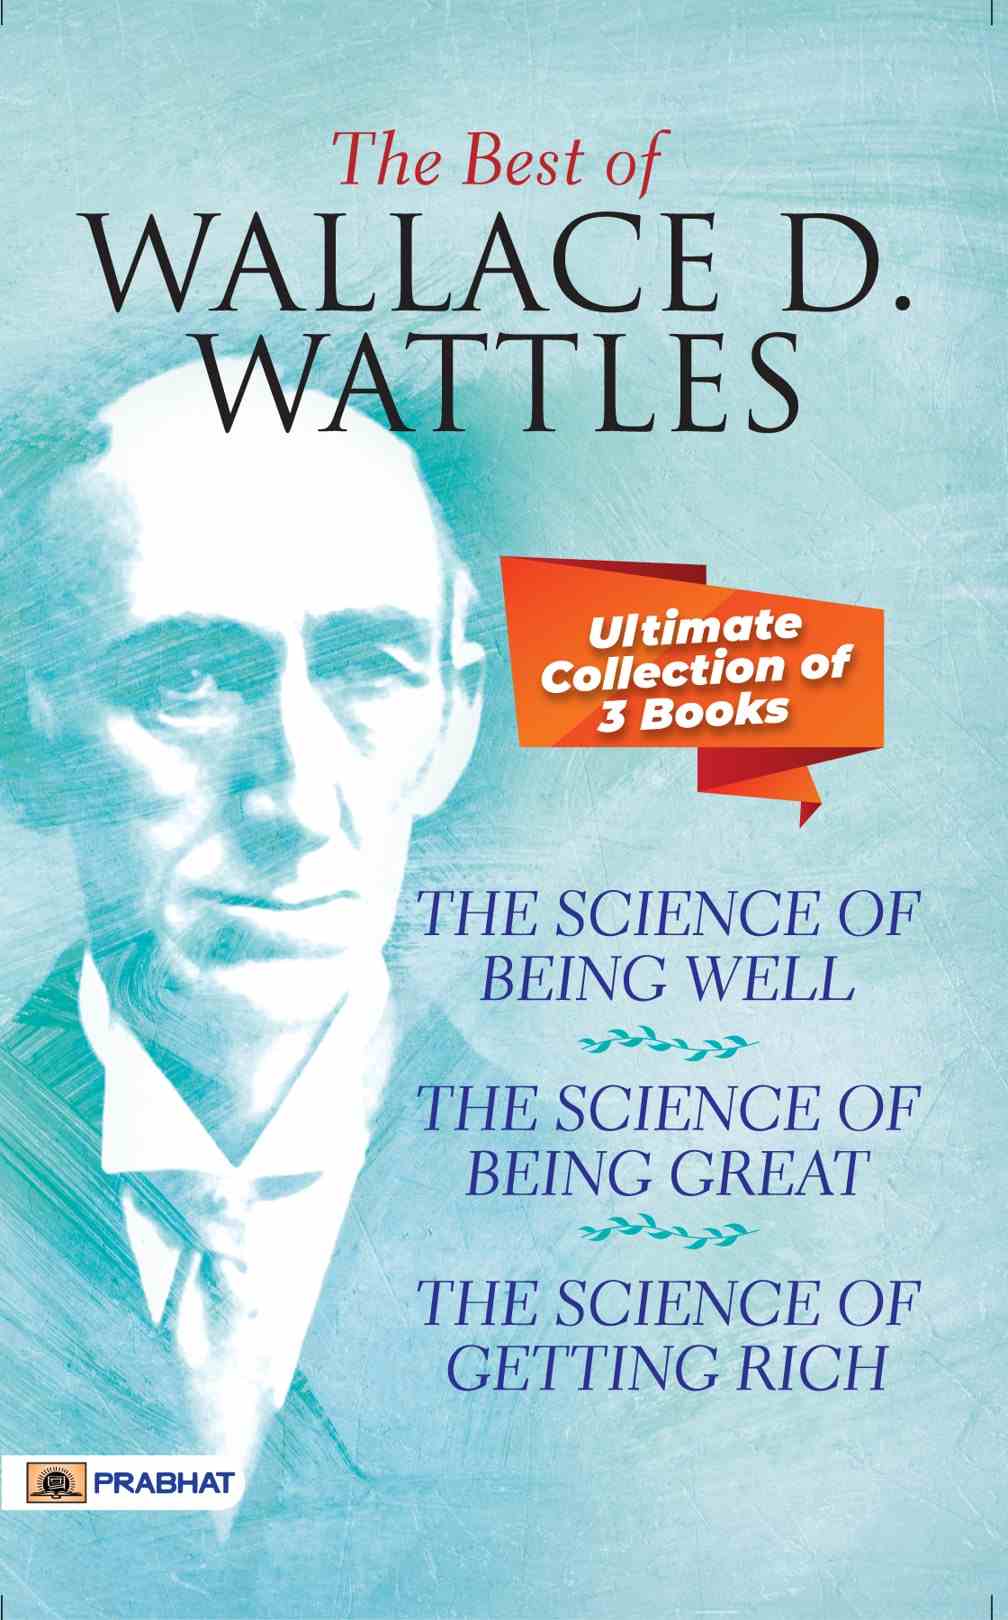 The Best Of Wallace D. Wattles (The Science of Getting Rich, The Science of Being Well and The Science of Being Great)